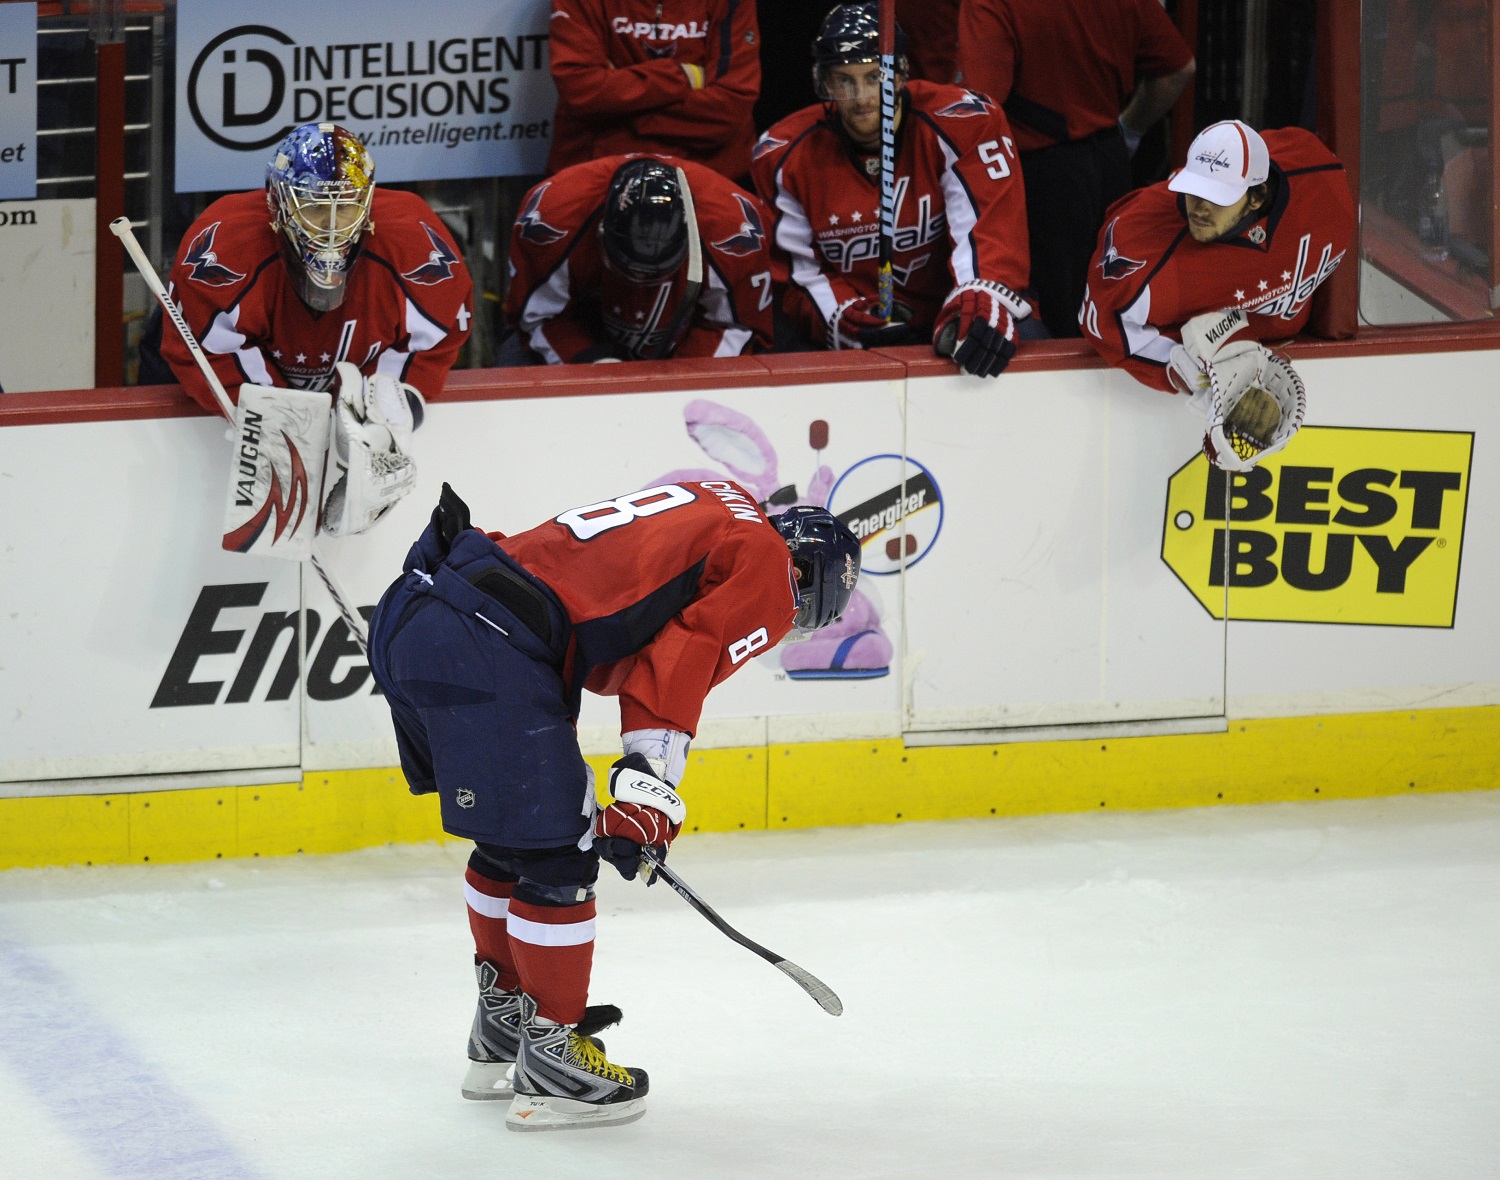 Washington Capitals left wing Alex Ovechkin (8), of Russia, skates with his head down after the Capitals lost to theMontreal Canadiens 2-1 in Game 7 of the NHL hockey playoff series, Wednesday, April 28, 2010, in Washington. (AP Photo/Nick Wass)